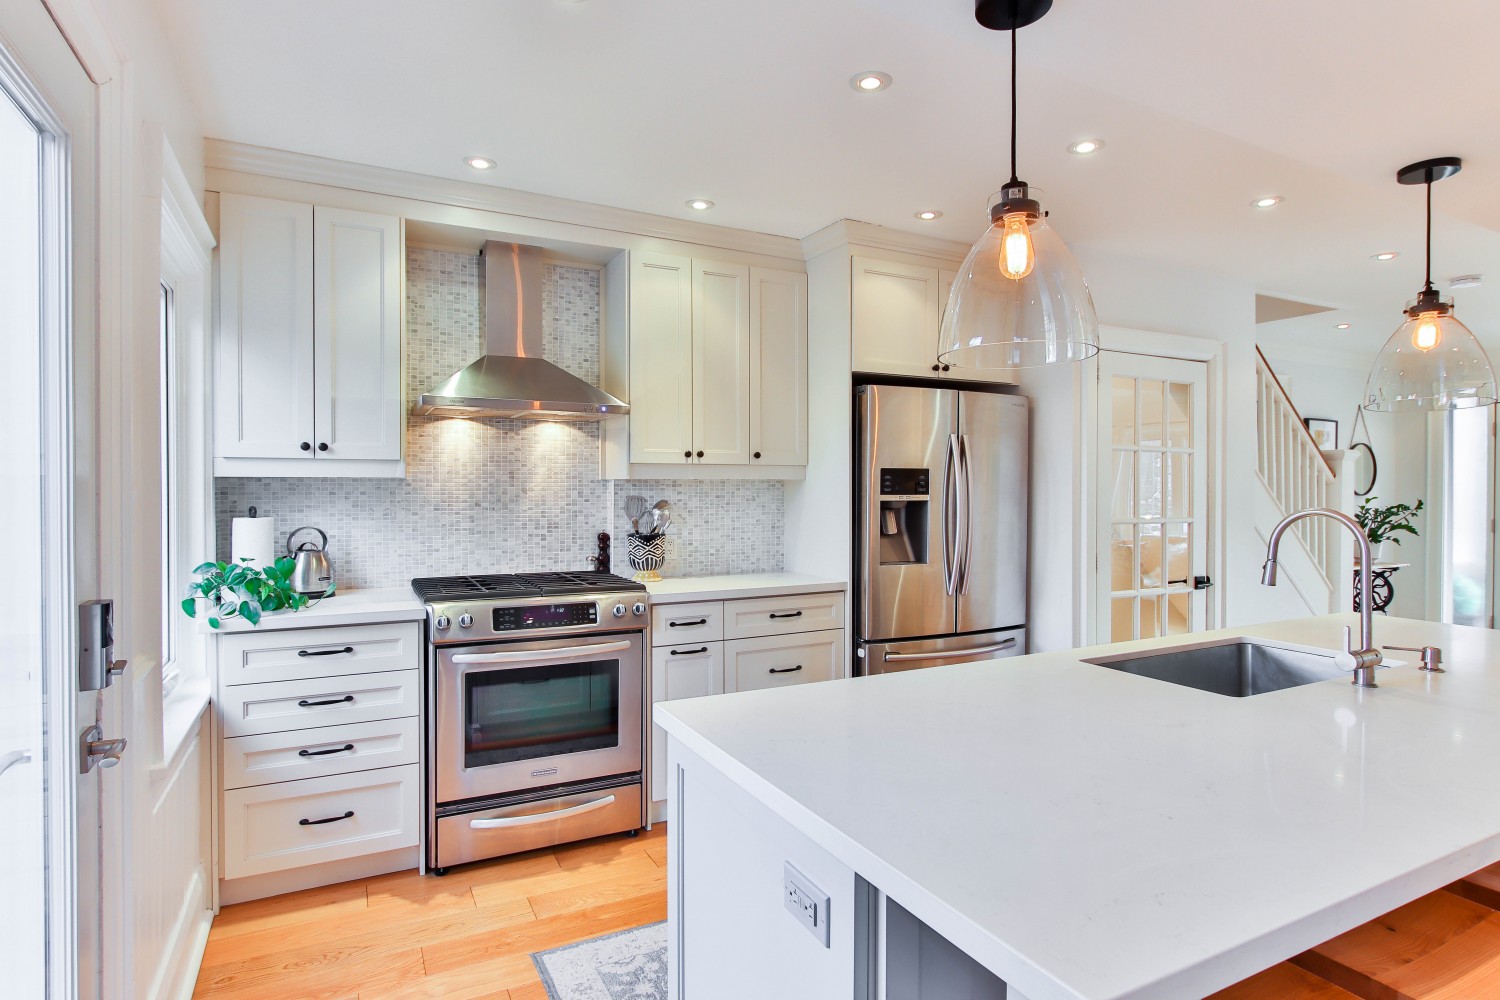 Entertainment Vs Family Kitchen Design in NZ   Advice by Our Lead ...